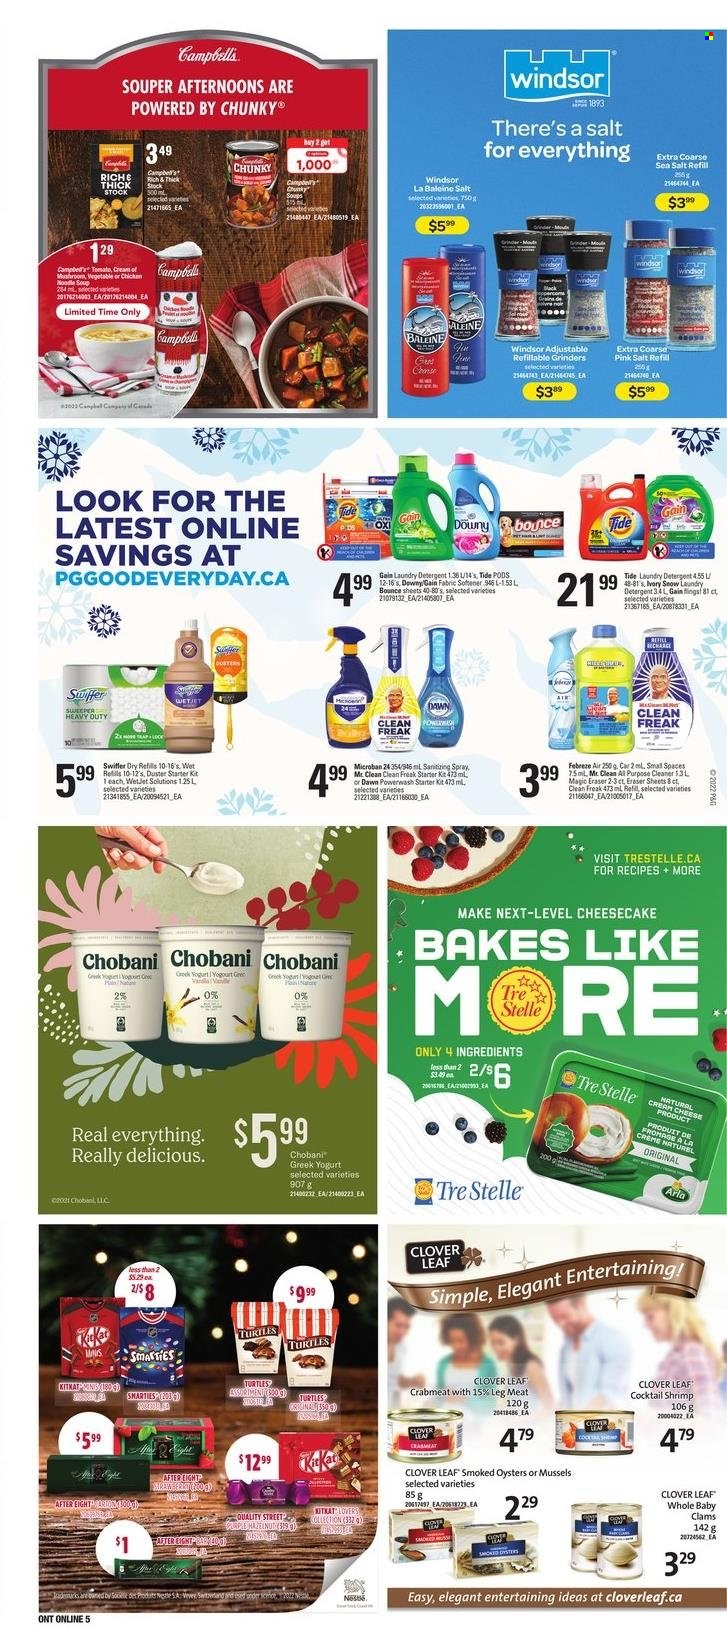 thumbnail - Zehrs Flyer - December 01, 2022 - December 07, 2022 - Sales products - cheesecake, clams, crab meat, mussels, smoked oysters, oysters, shrimps, Campbell's, soup, noodles cup, noodles, cream cheese, cheese, Arla, greek yoghurt, yoghurt, Clover, Chobani, After Eight, sea salt, Febreze, Gain, cleaner, all purpose cleaner, Swiffer, Tide, fabric softener, laundry detergent, Bounce, duster, WetJet, eraser, paper, turtles, Bosch, grinder, detergent, Smarties. Page 9.